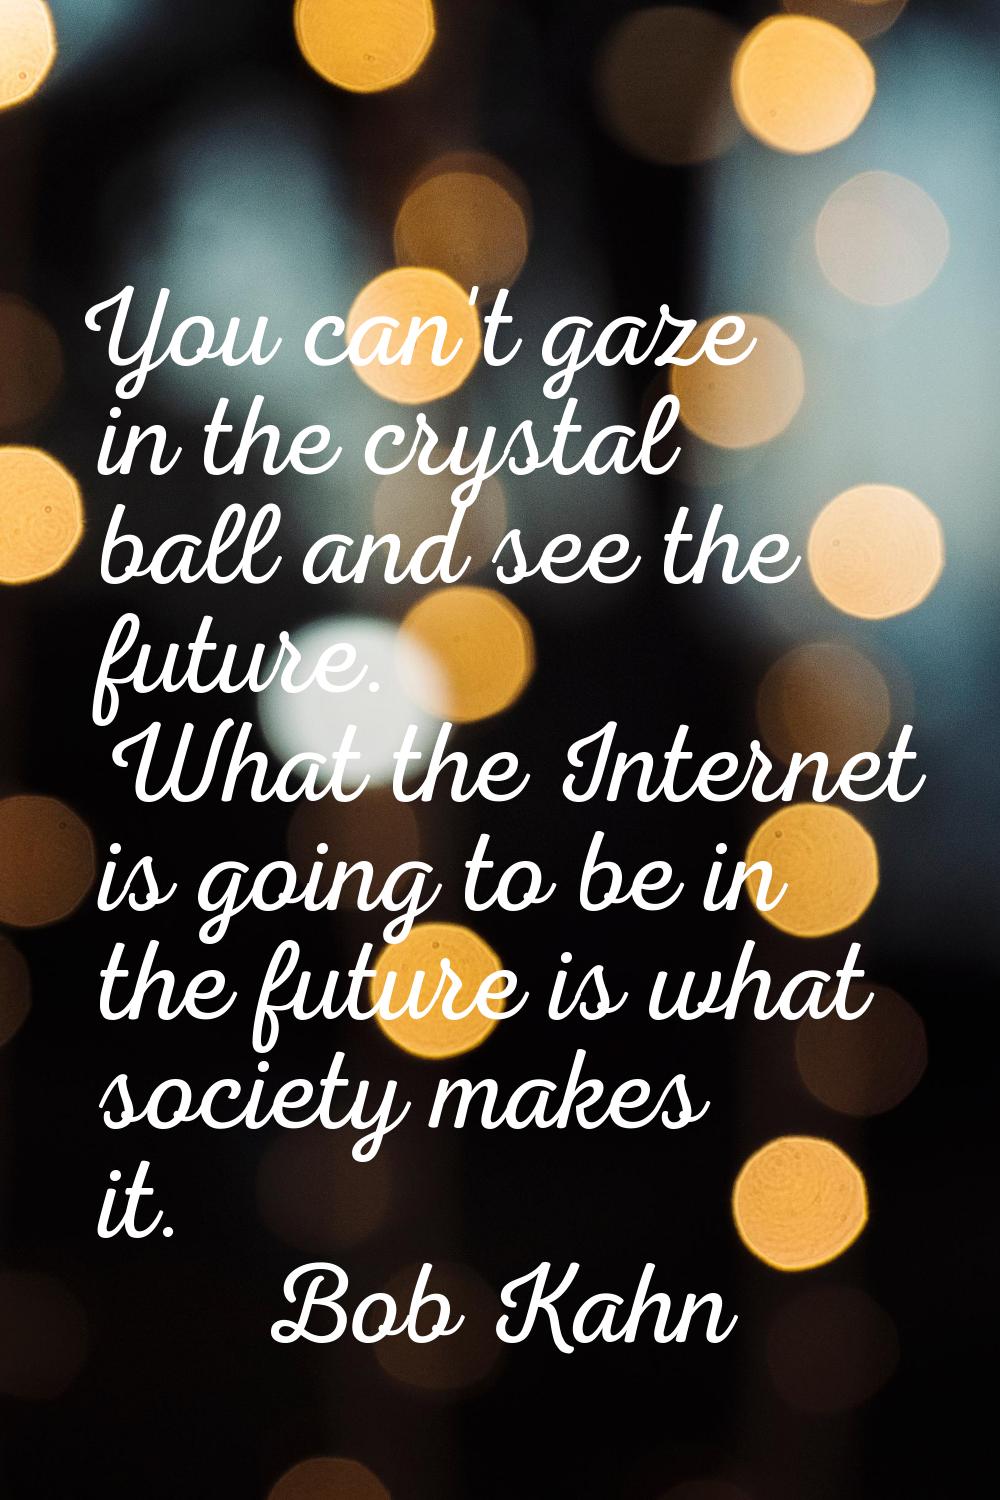 You can't gaze in the crystal ball and see the future. What the Internet is going to be in the futu